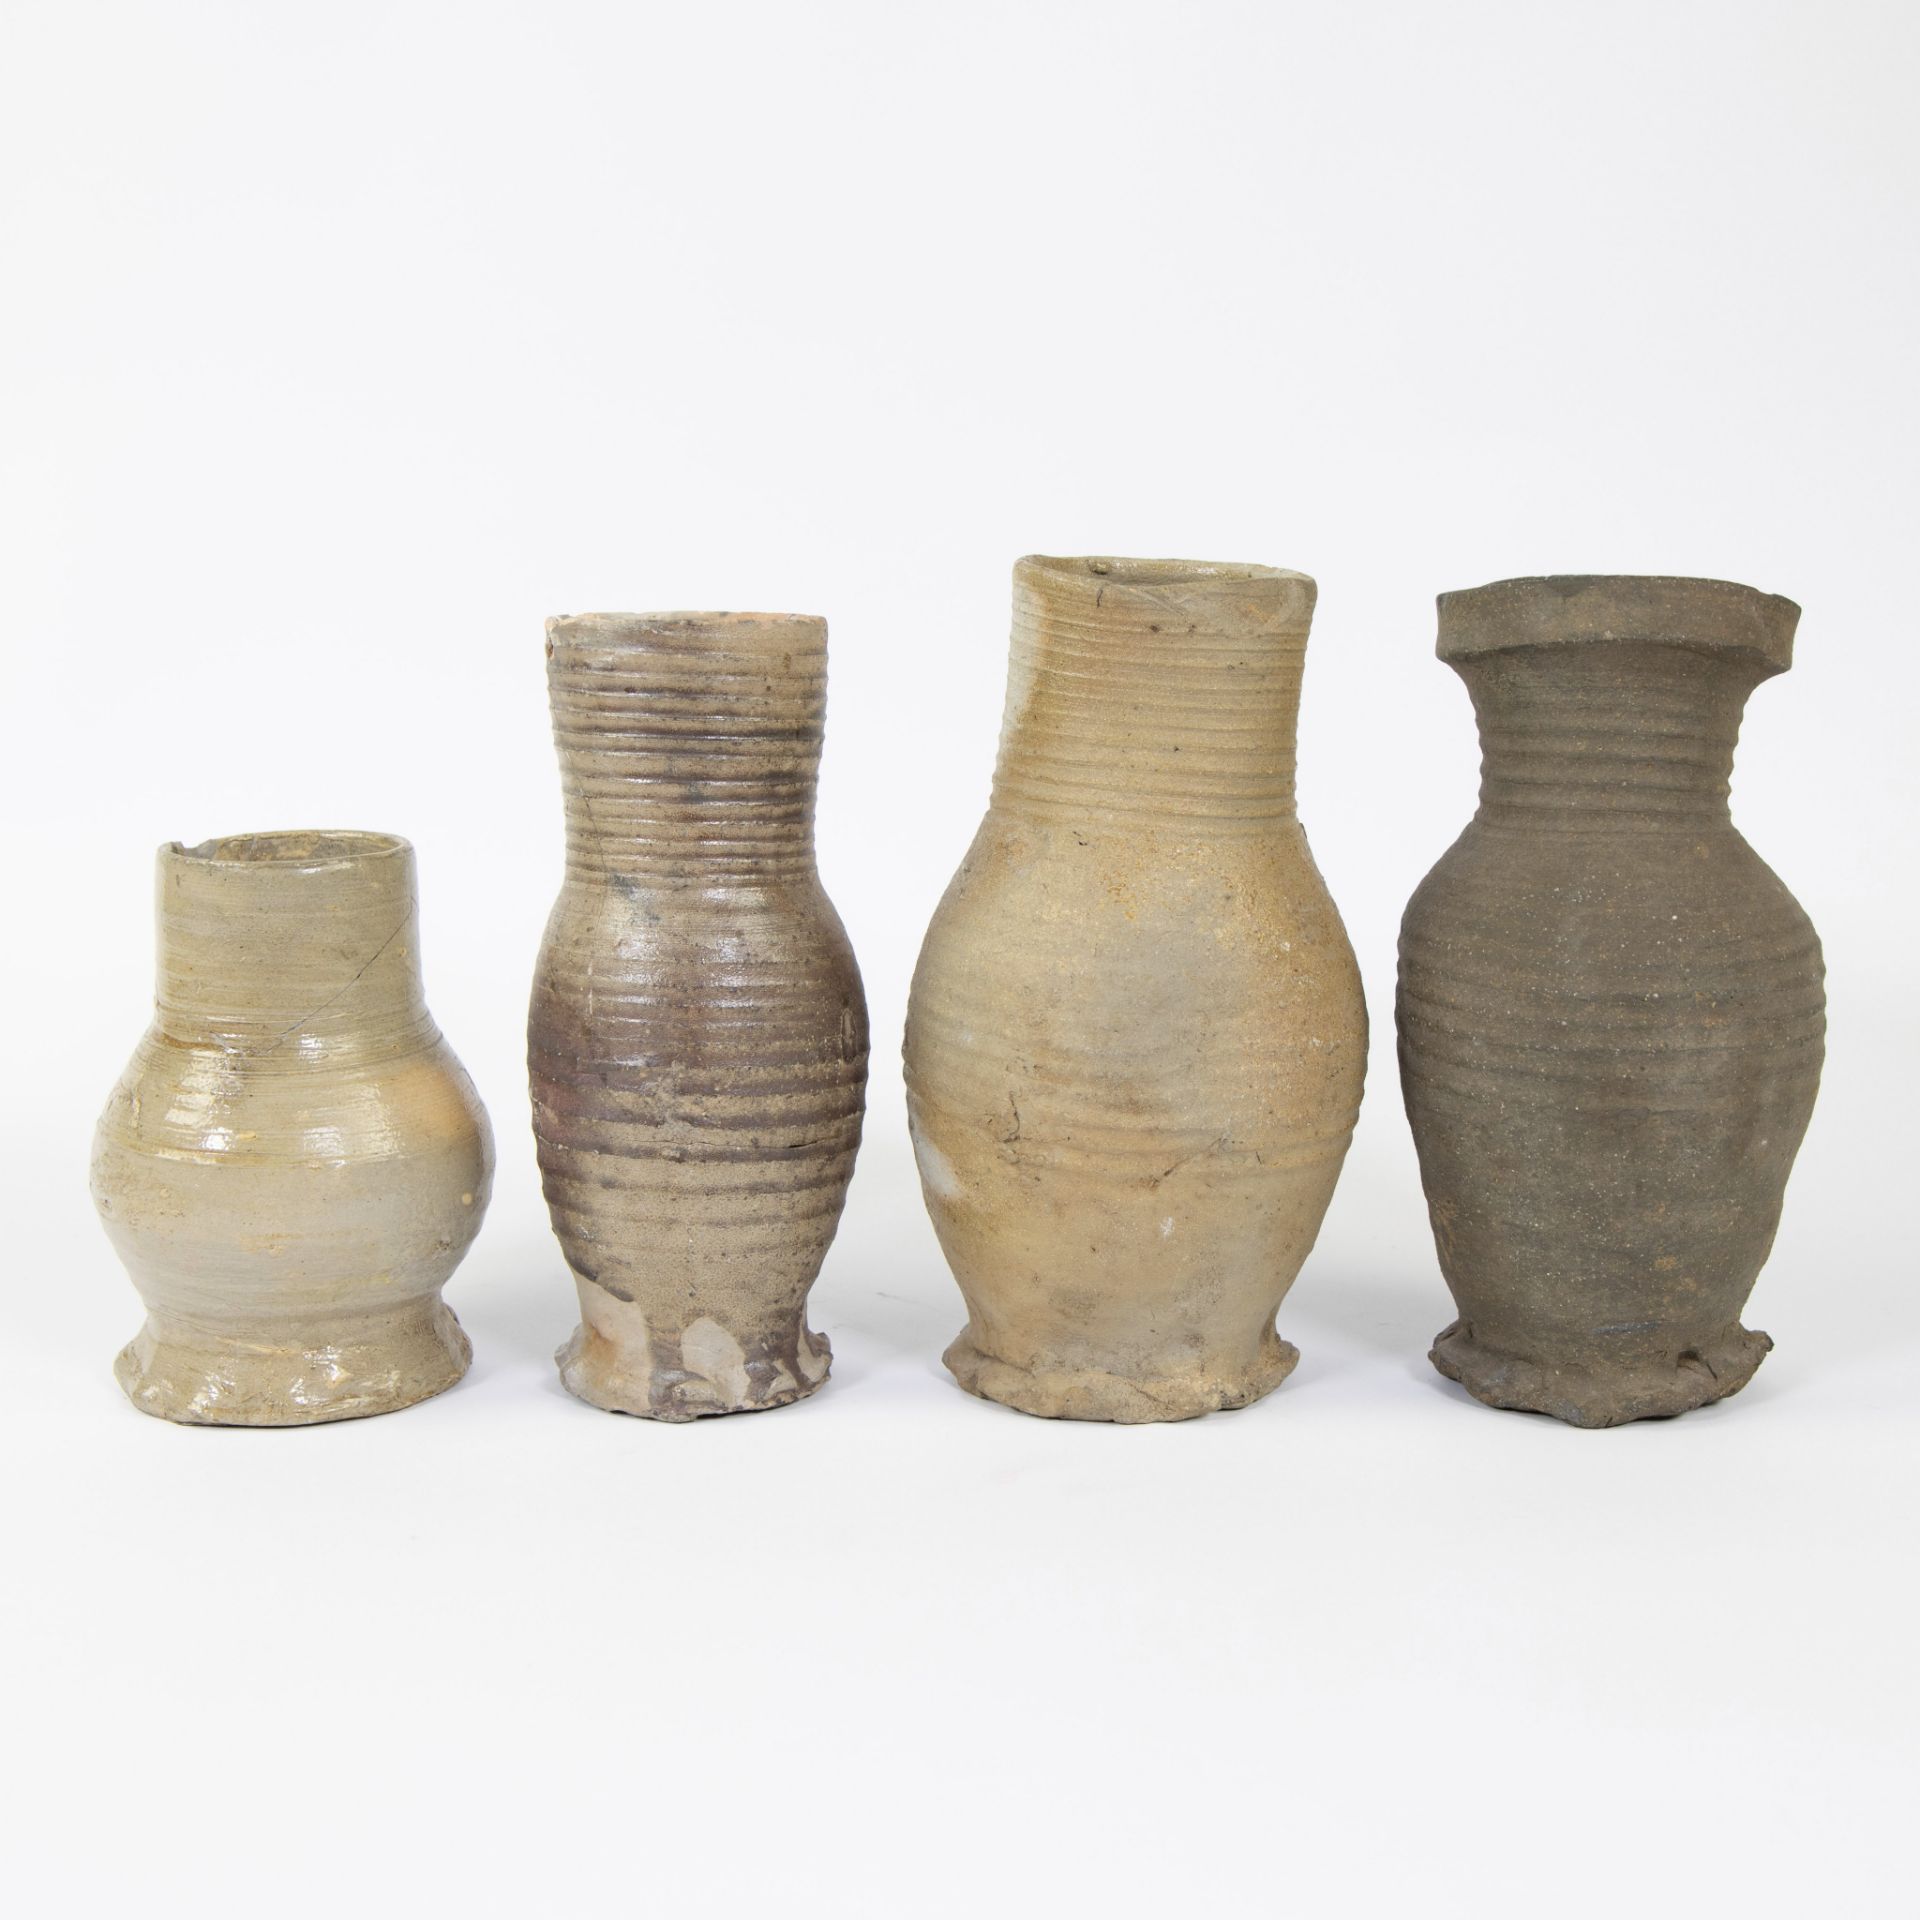 Collection of archaeological stoneware, jug Langerwald 15th, Siegburg 13th and 14th and Raeren 16th - Image 4 of 5